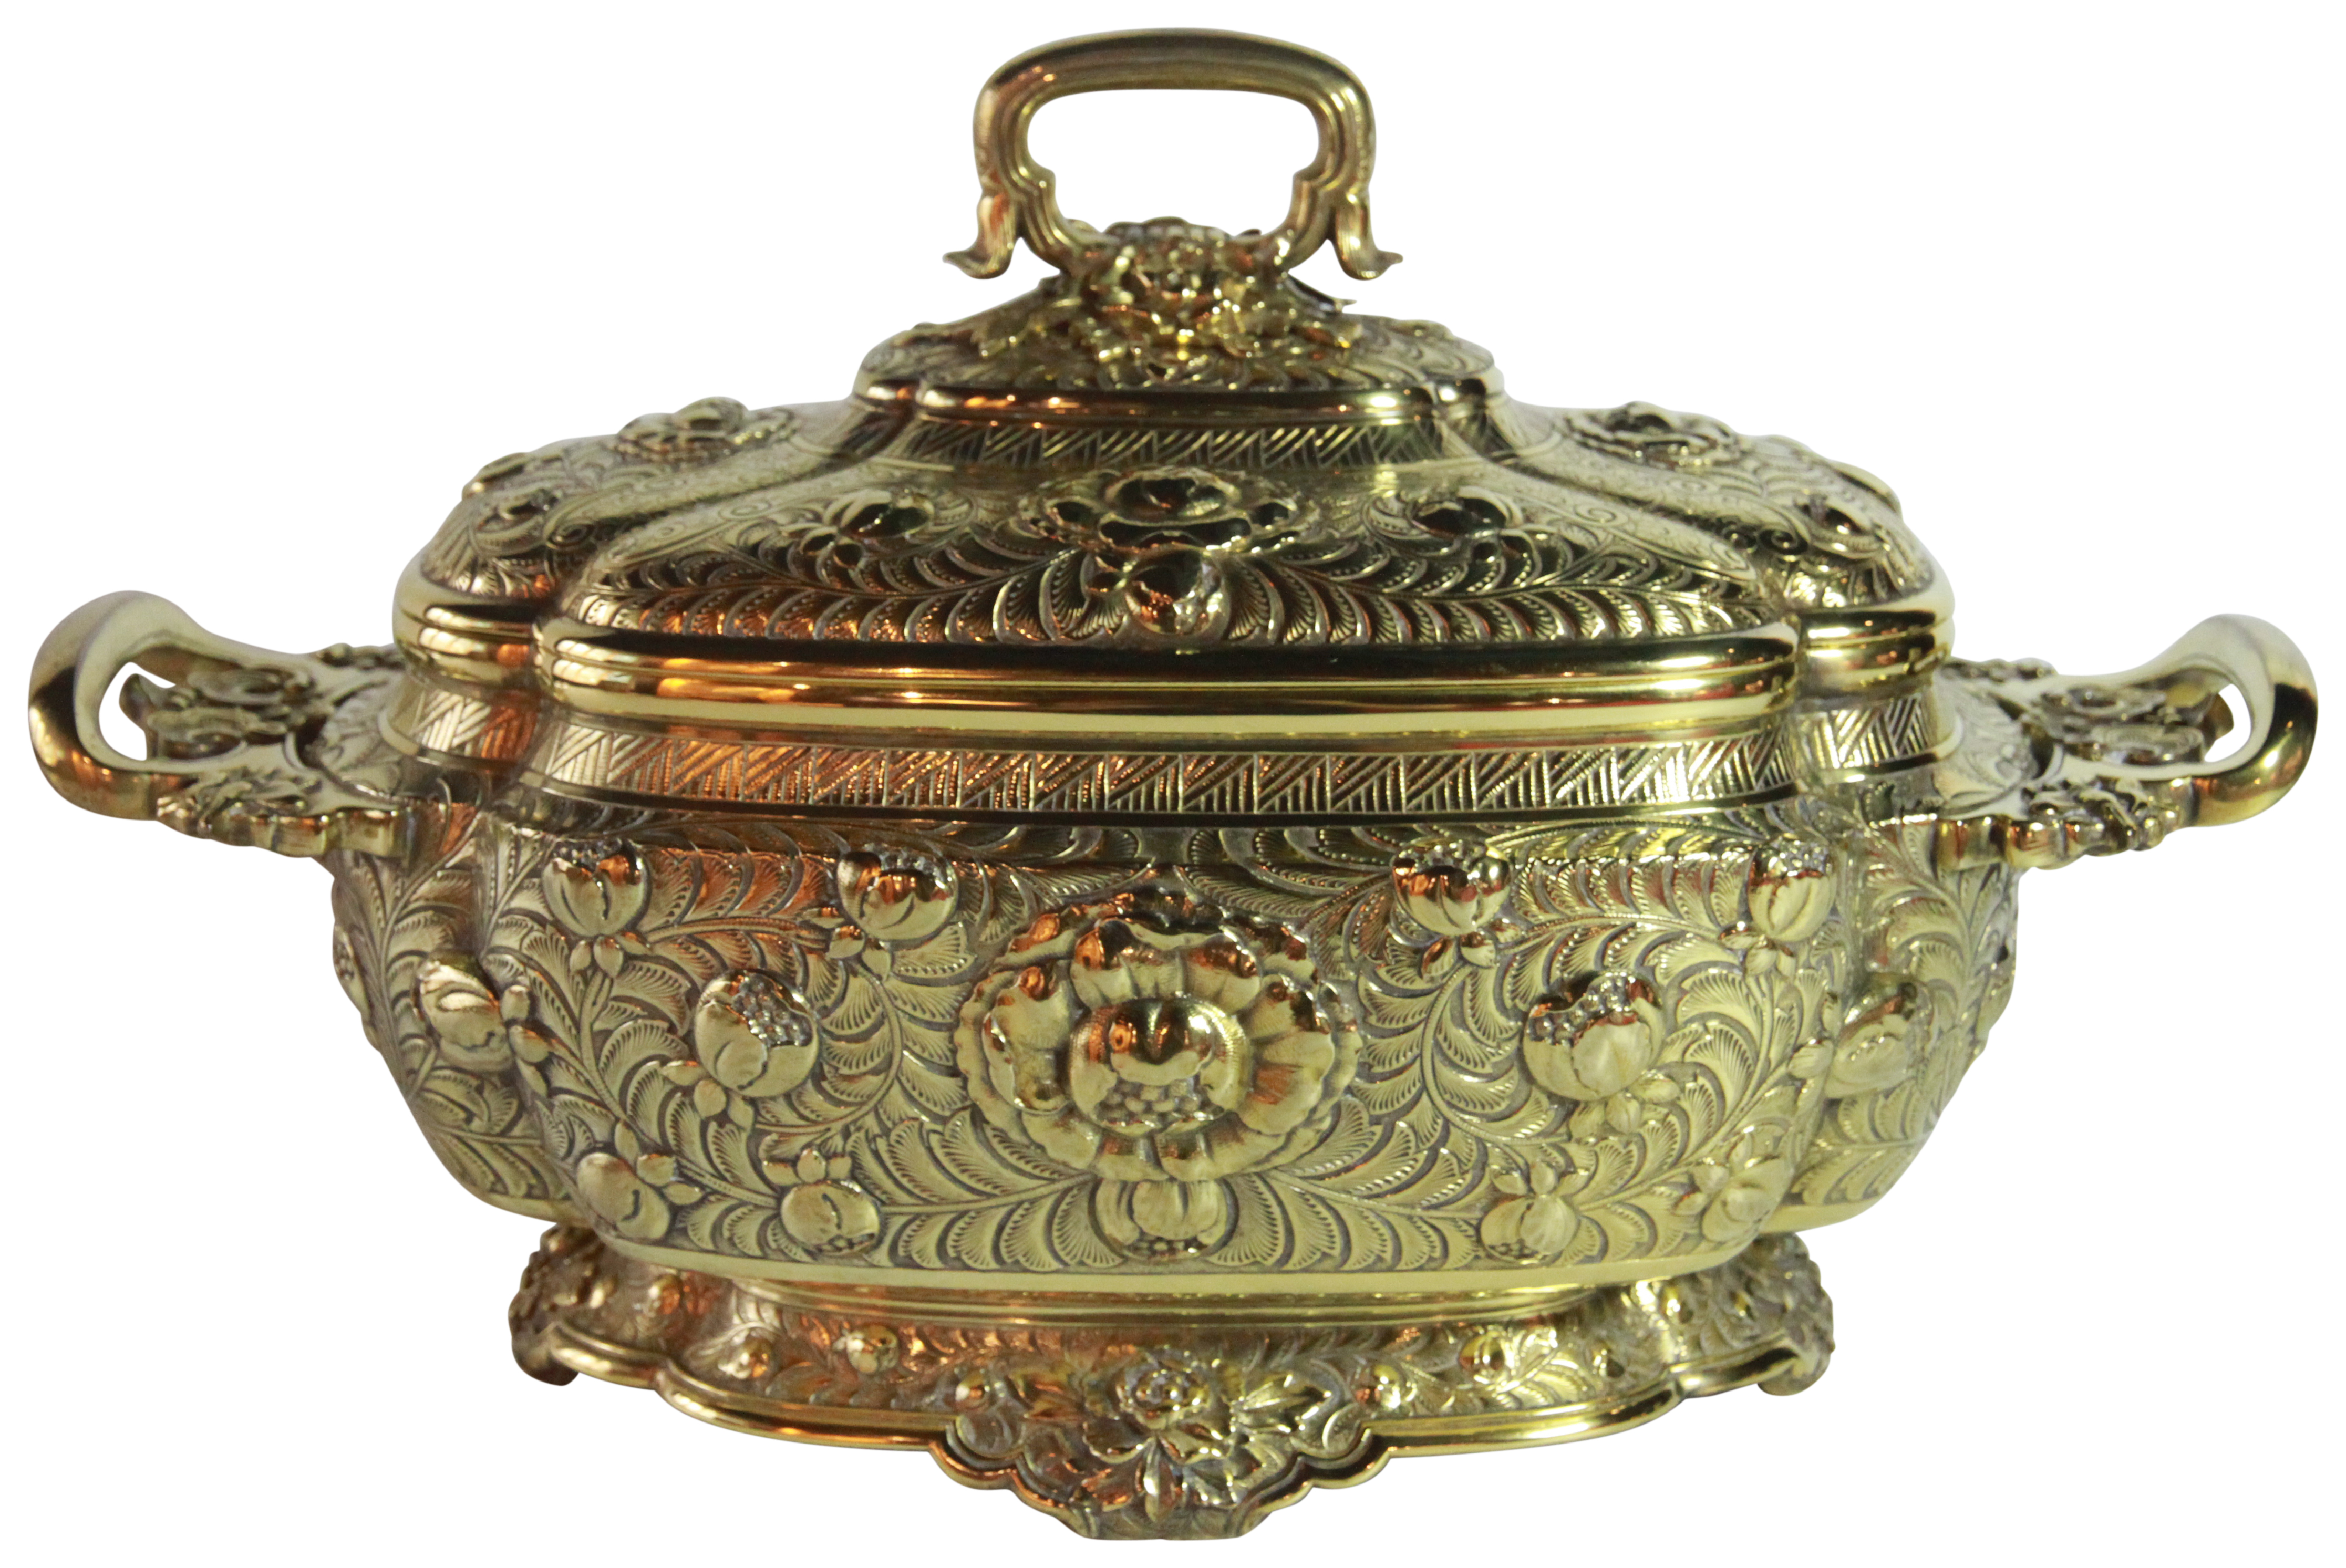 A superb American silver gilt tureen & cover decorated in the Chinese Chippendale taste amongst